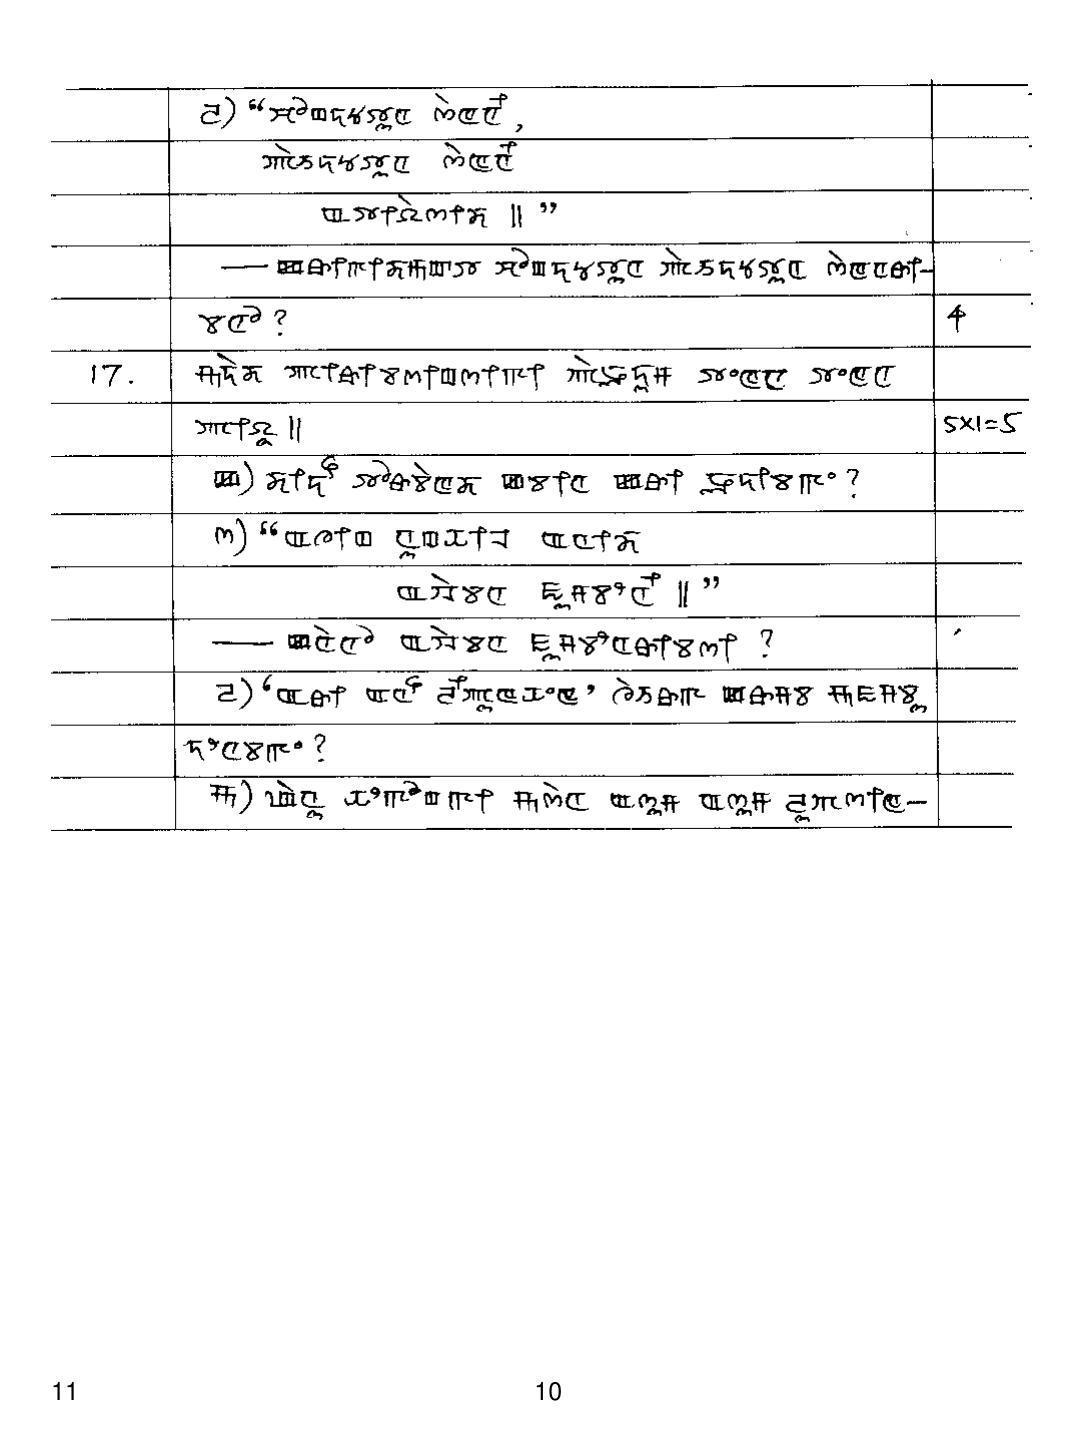 CBSE Class 12 11 Manipuri_compressed 2019 Question Paper - Page 10